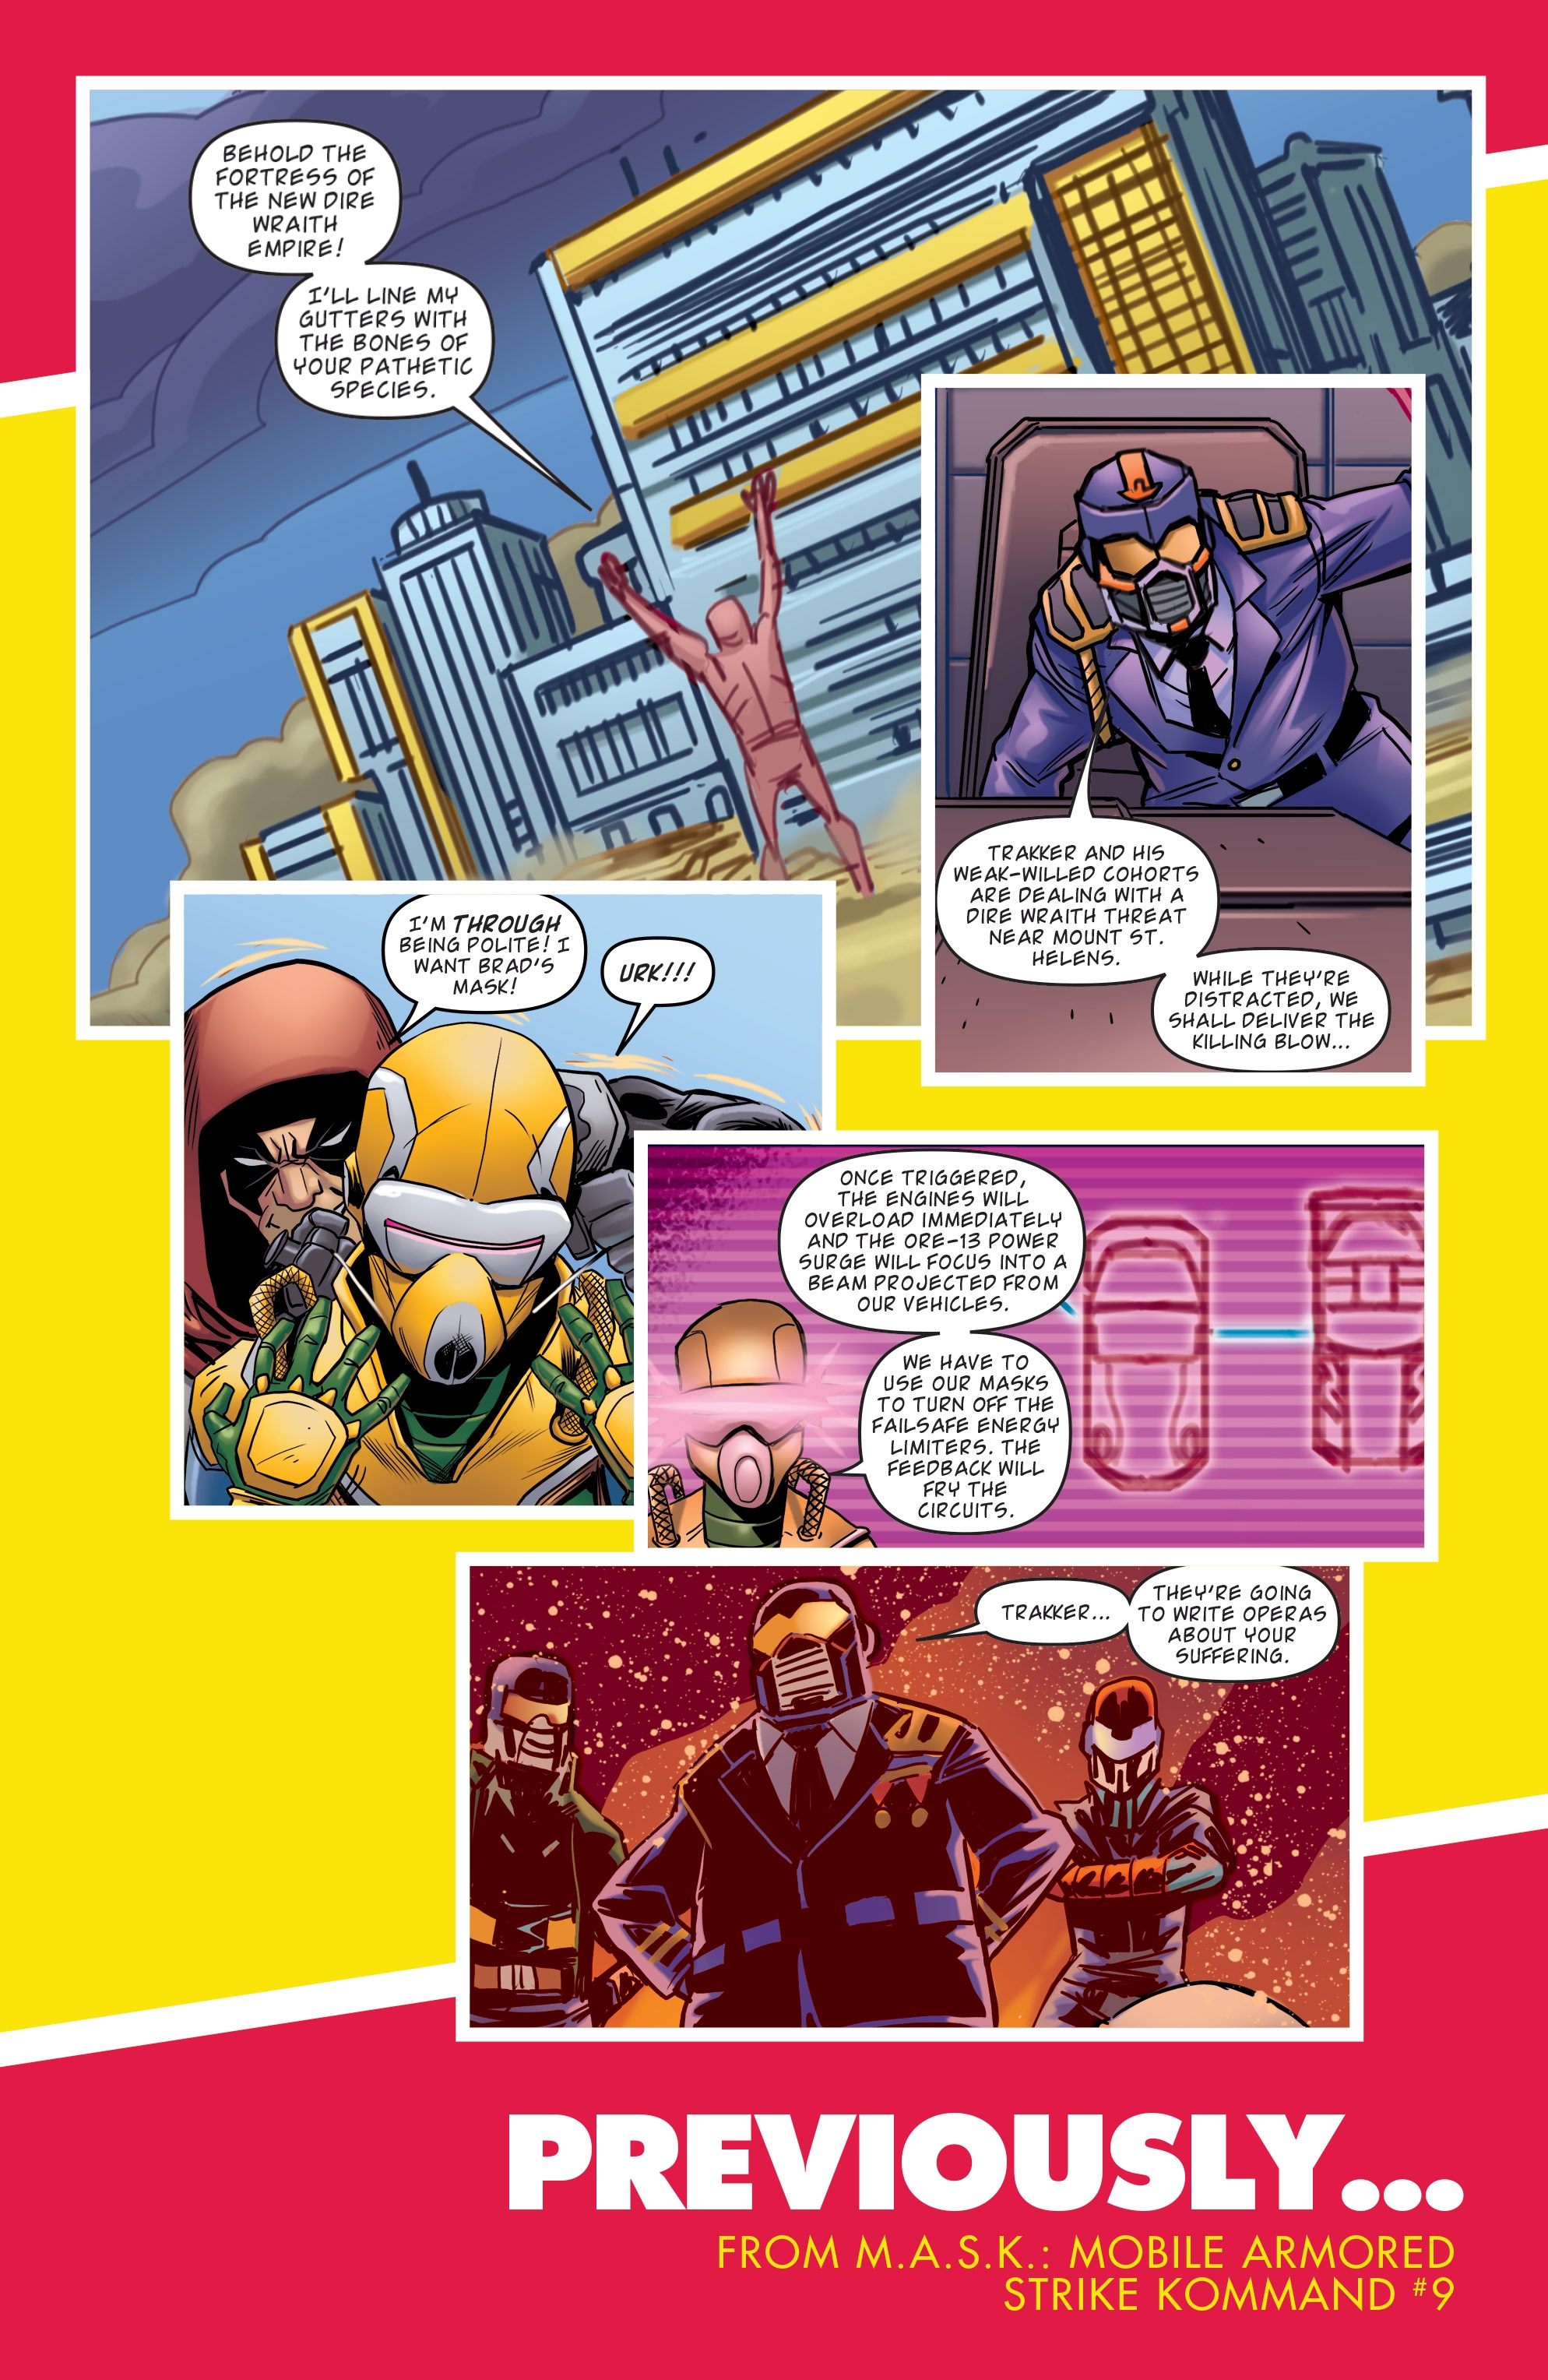 M.A.S.K.: Mobile Armored Strike Kommand: Chapter 10 - Page 3